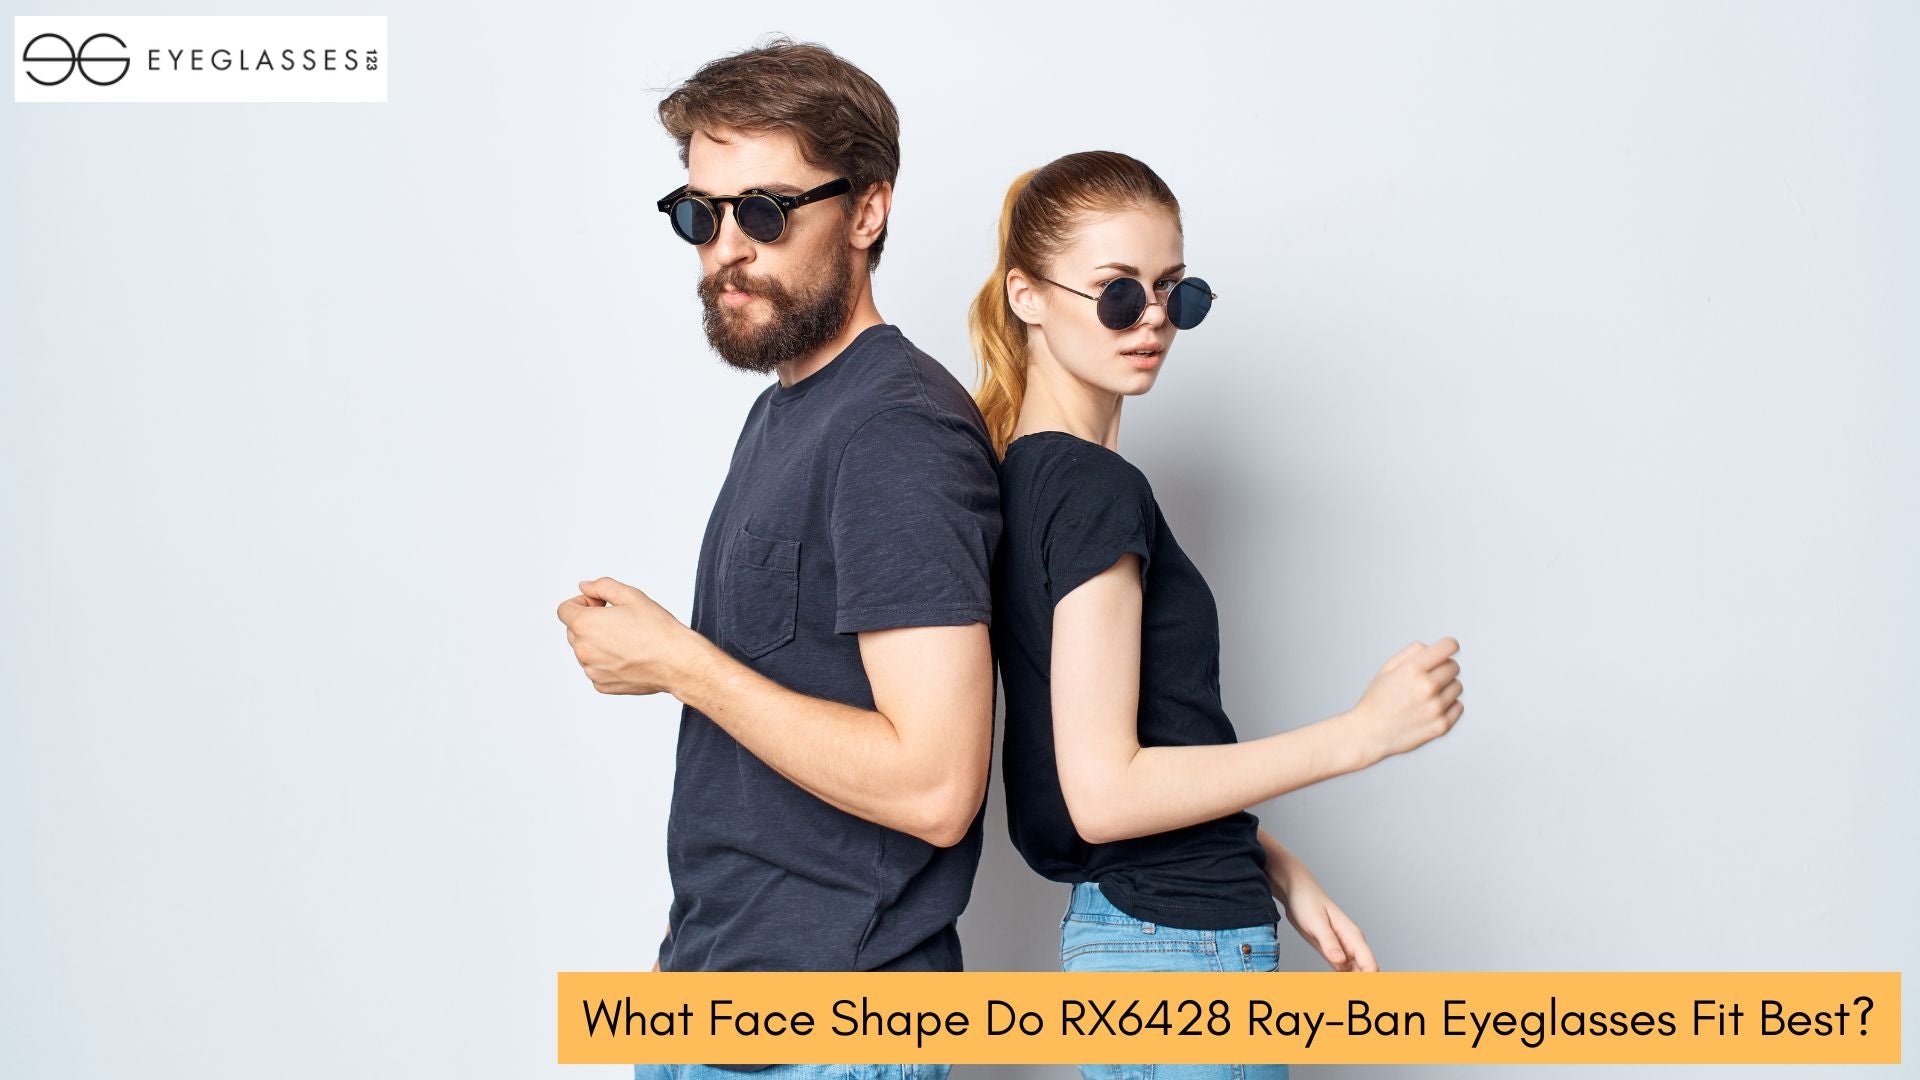 What Face Shape Do RX6428 Ray-Ban Eyeglasses Fit Best?